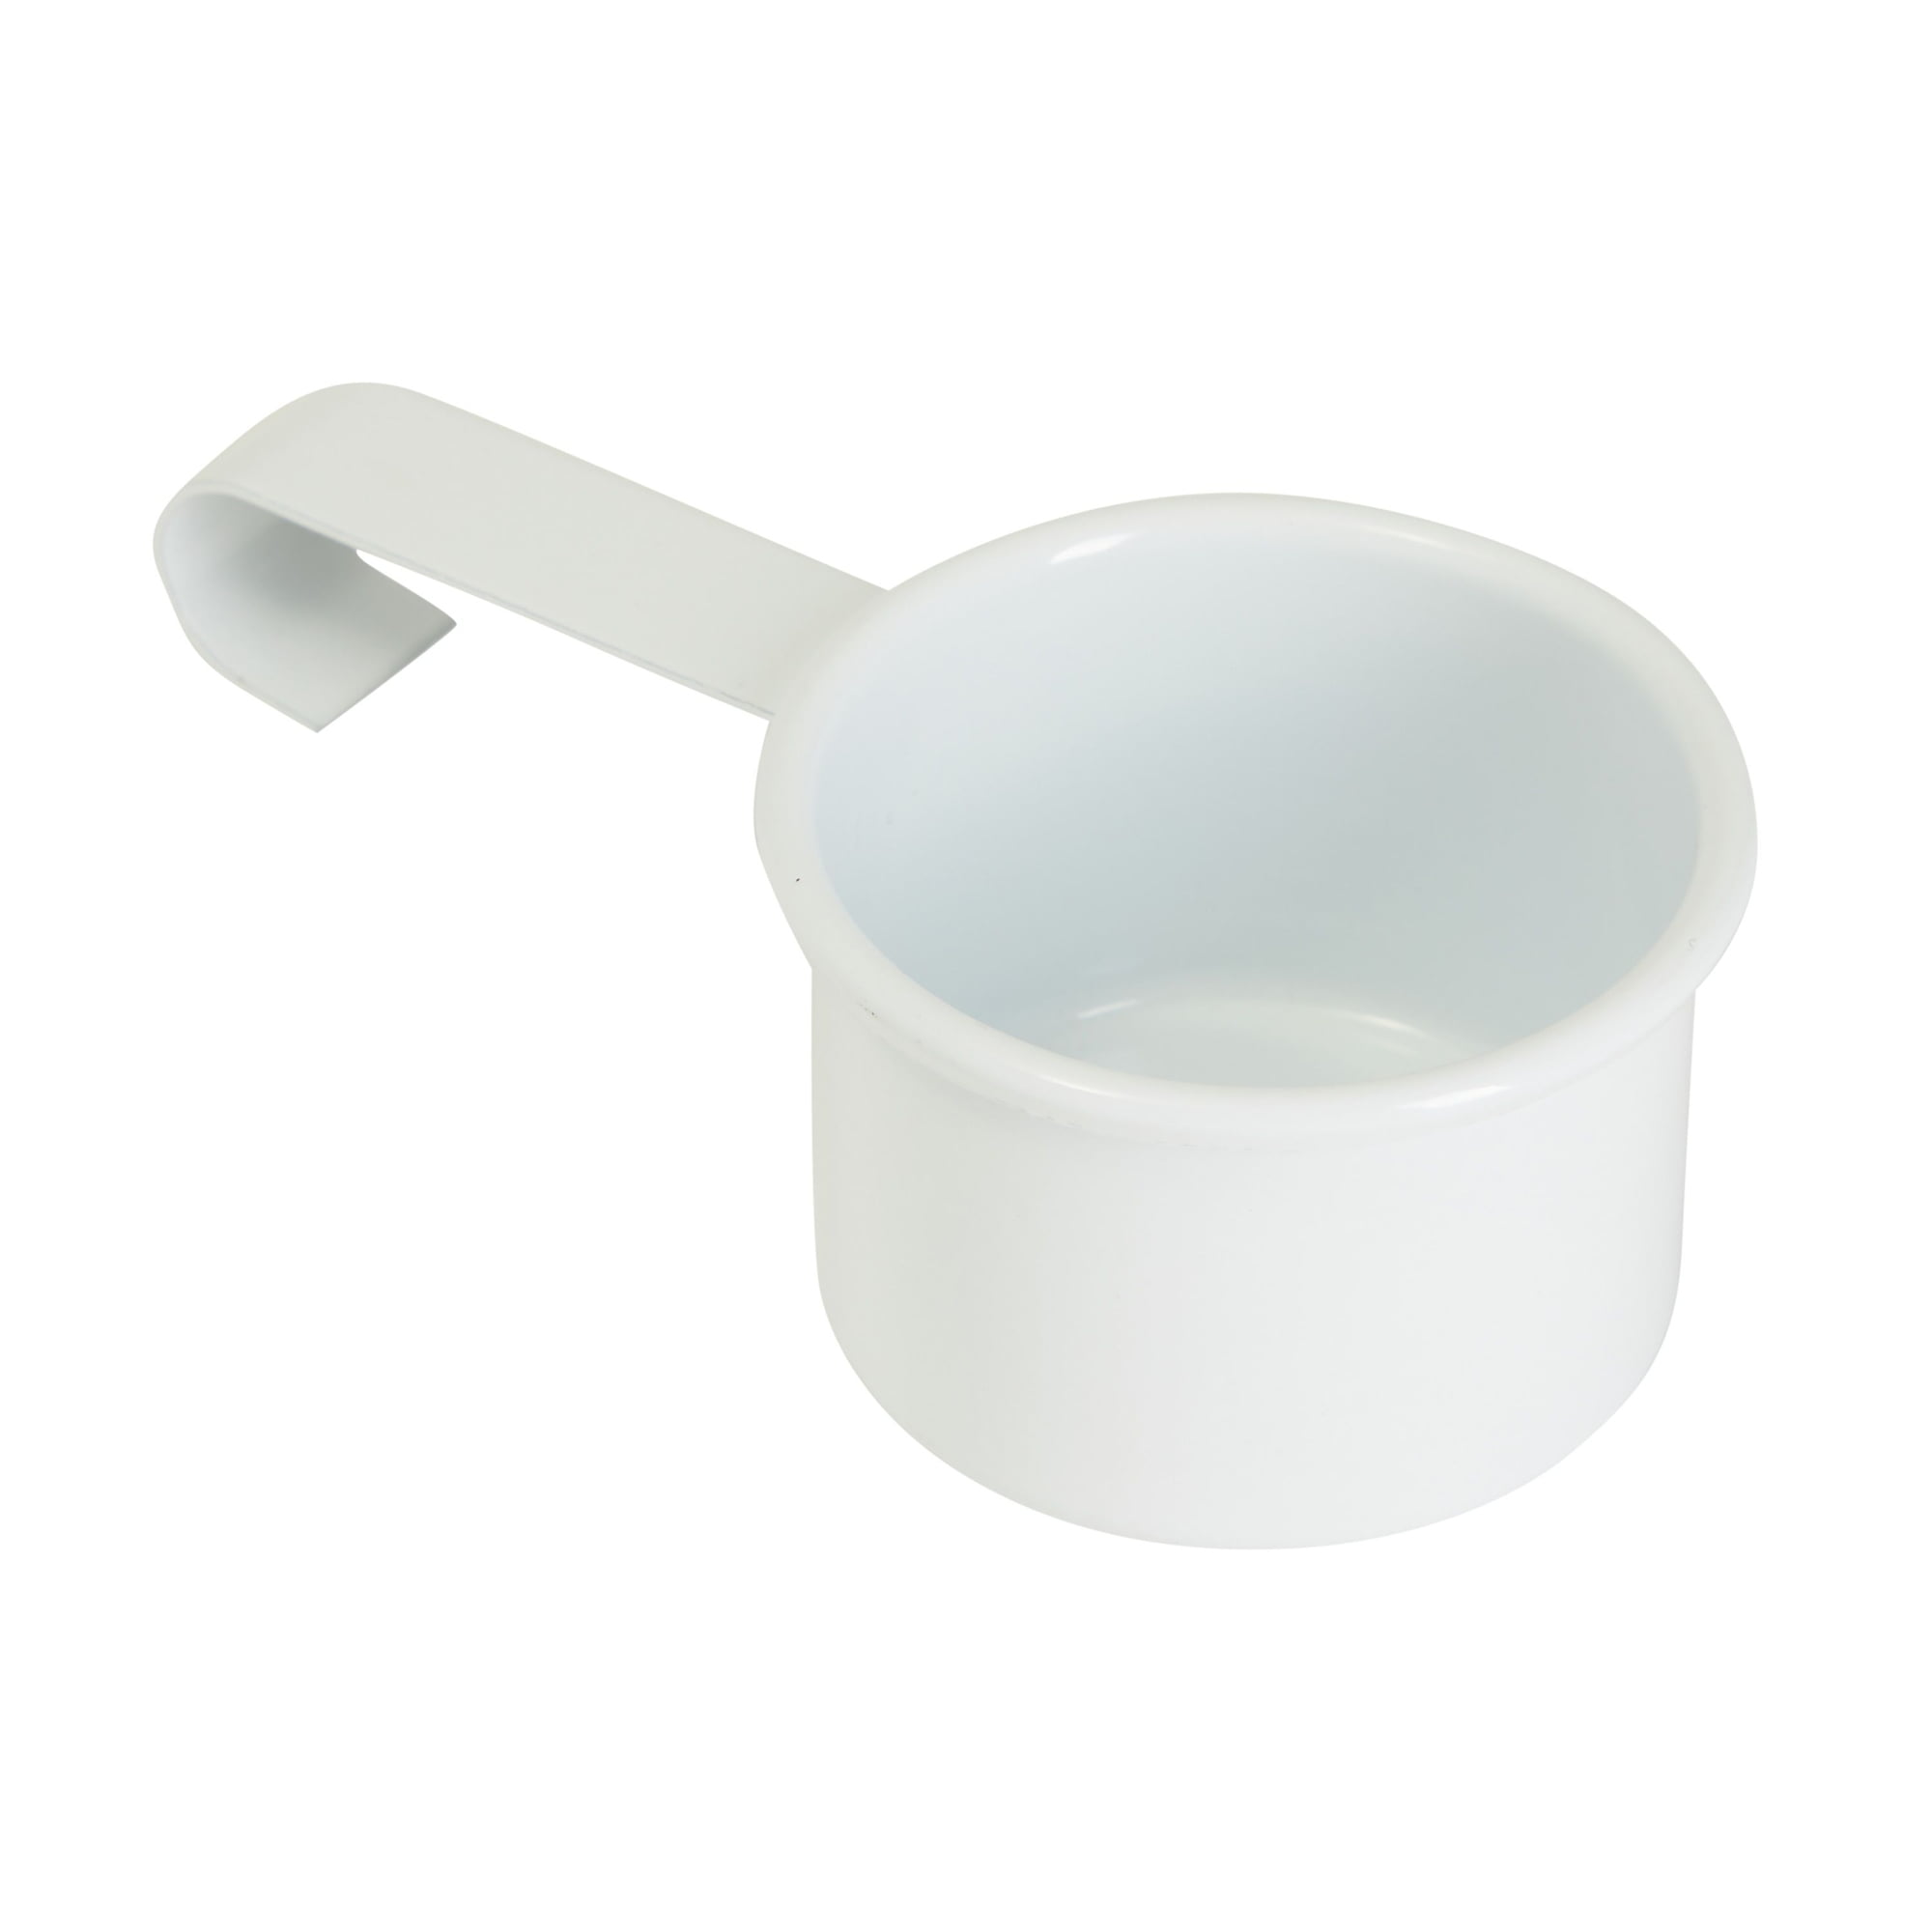 White Laundry Detergent Container with Scooper (7 x 9.25 x 6 In